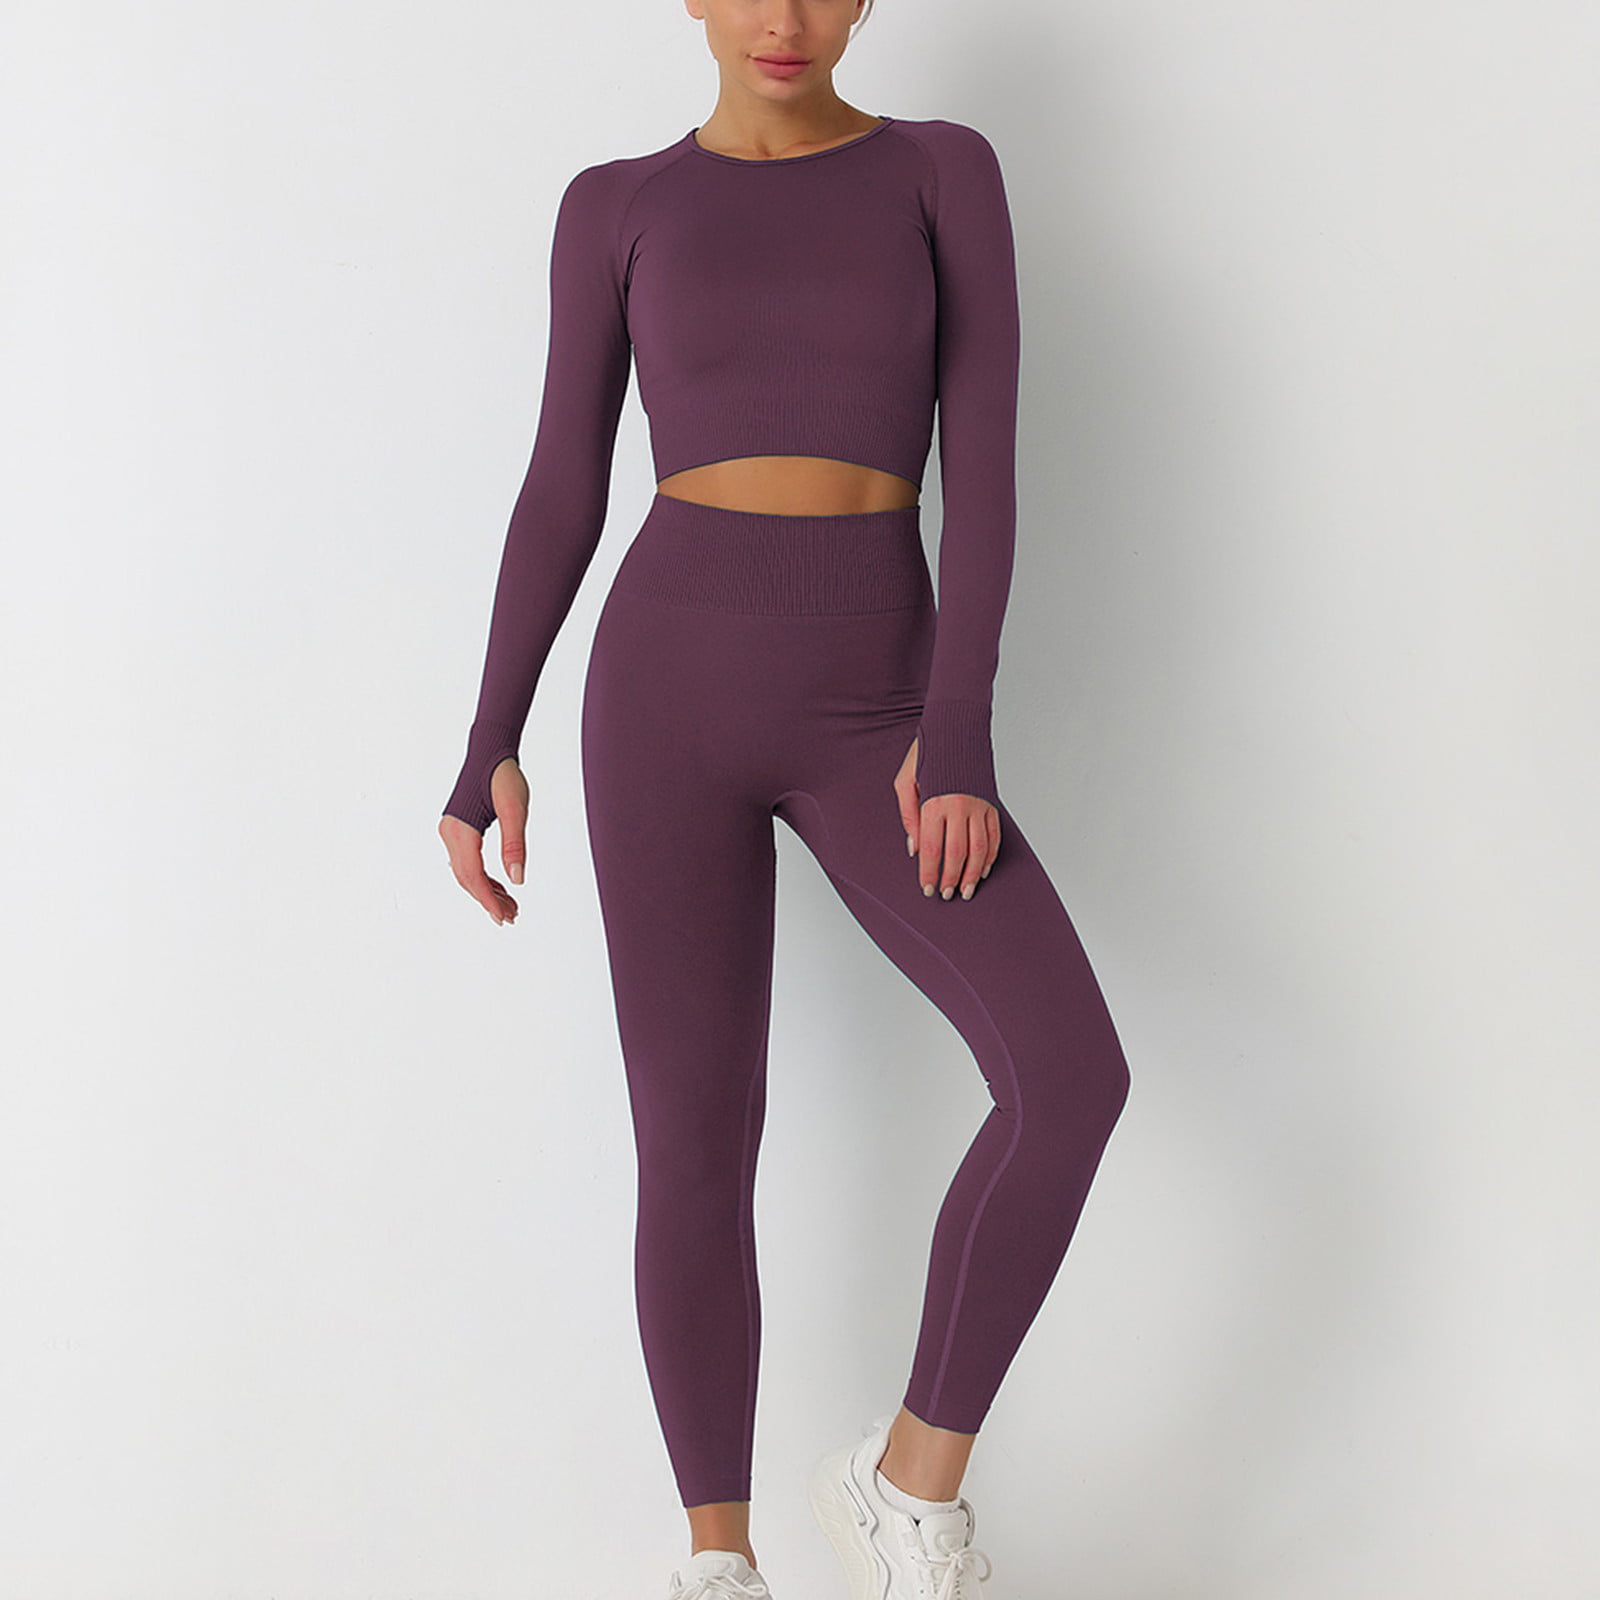  Womens Workout Sets 2 Piece - Seamless Yoga Leggings And  Zipper Jacket Crop Top Gym Outfits Activewear Matching Set - Purple Large